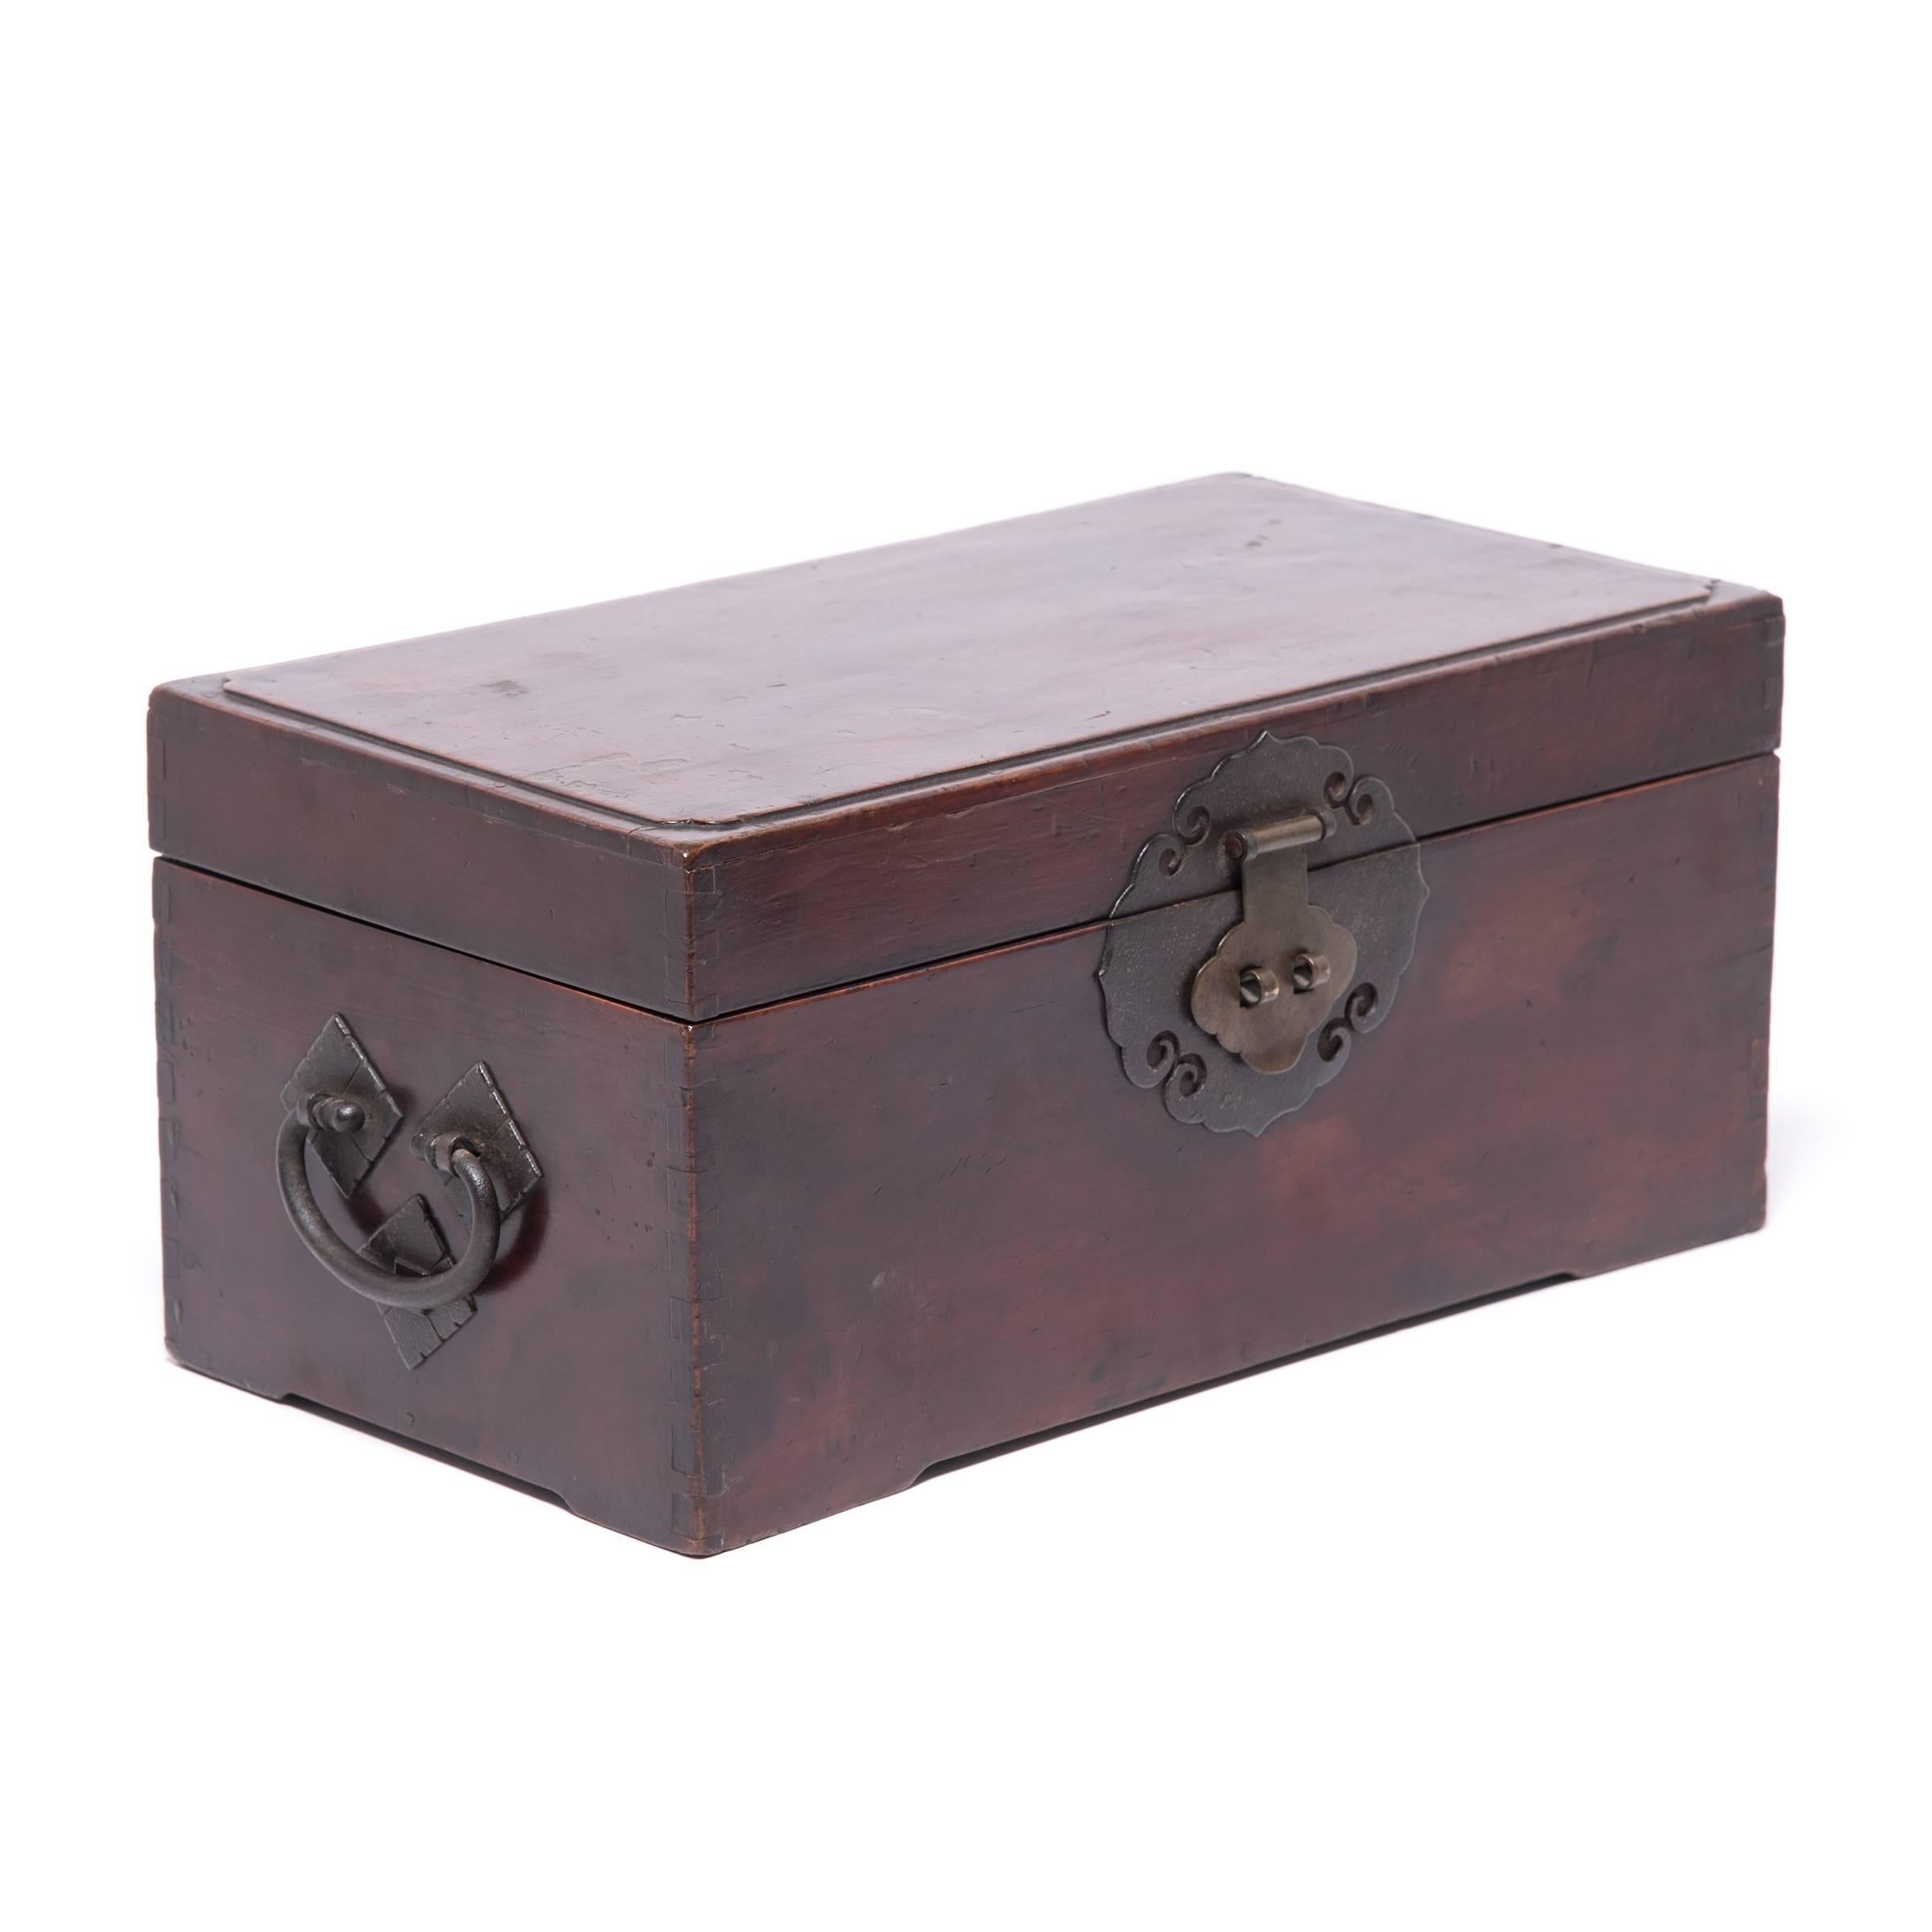 A special place to store jewelry, collected finds, love letters or even the everyday office supply, this lock box from Jiangsu province dates from circa 1850. Made of cedar, the box is lacquered in rich oxblood, a color known for its deep hues